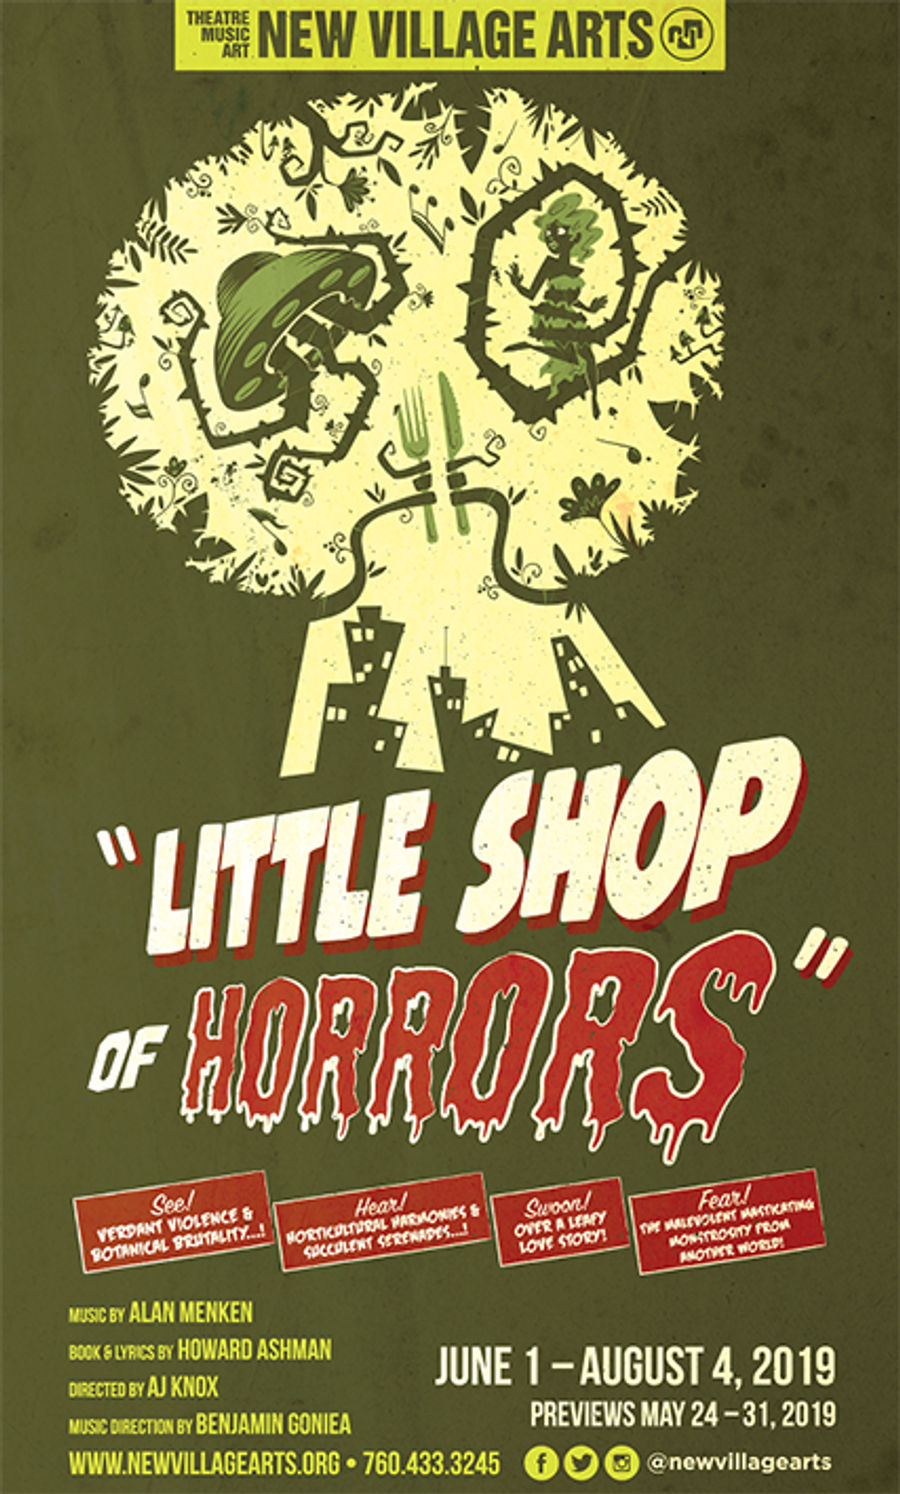 Summer Fun With Little Shop of Horrors At NVA